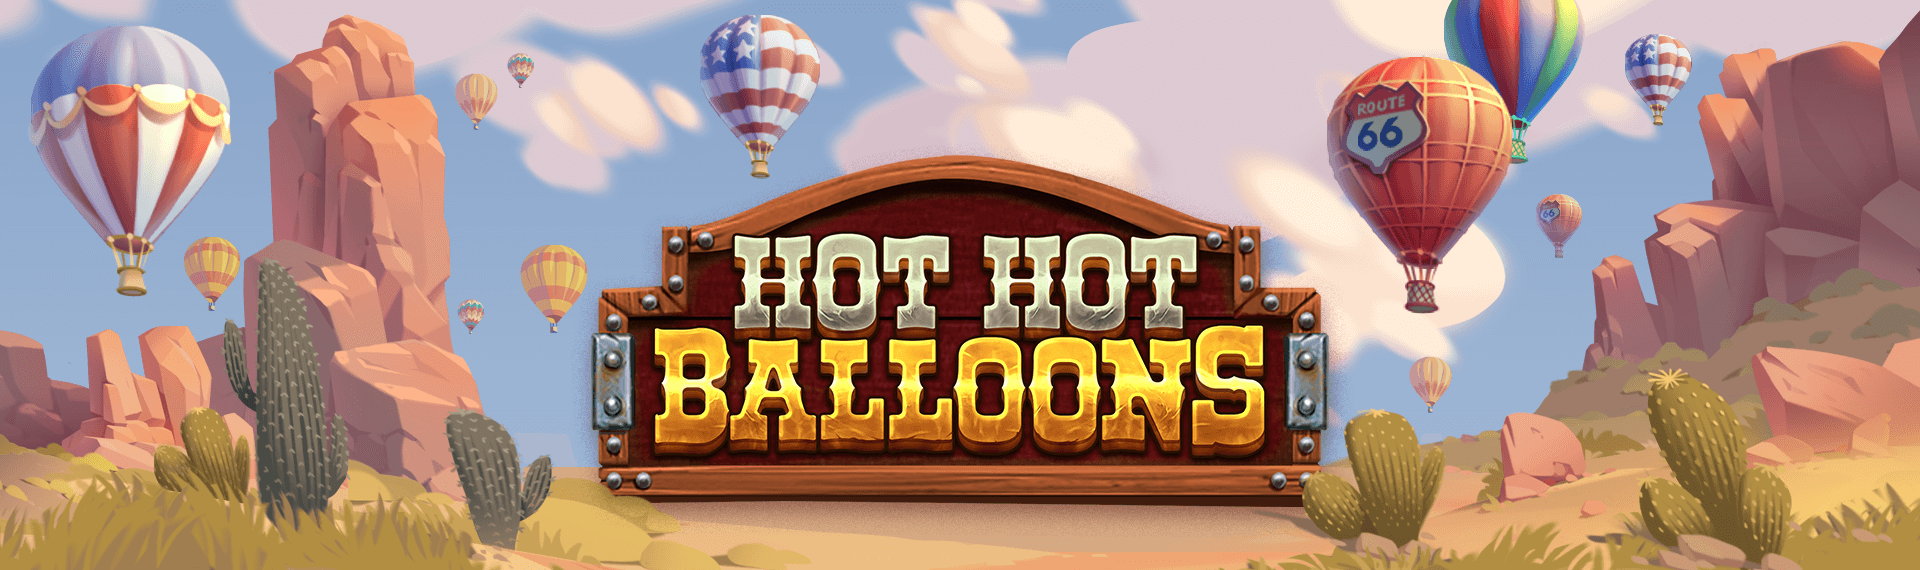 Hot Hot Balloons Screenshot <br />
<b>Notice</b>:  Undefined variable: key in <b>/var/www/html/wp-content/themes/armadillo/page-game.php</b> on line <b>37</b><br />
1